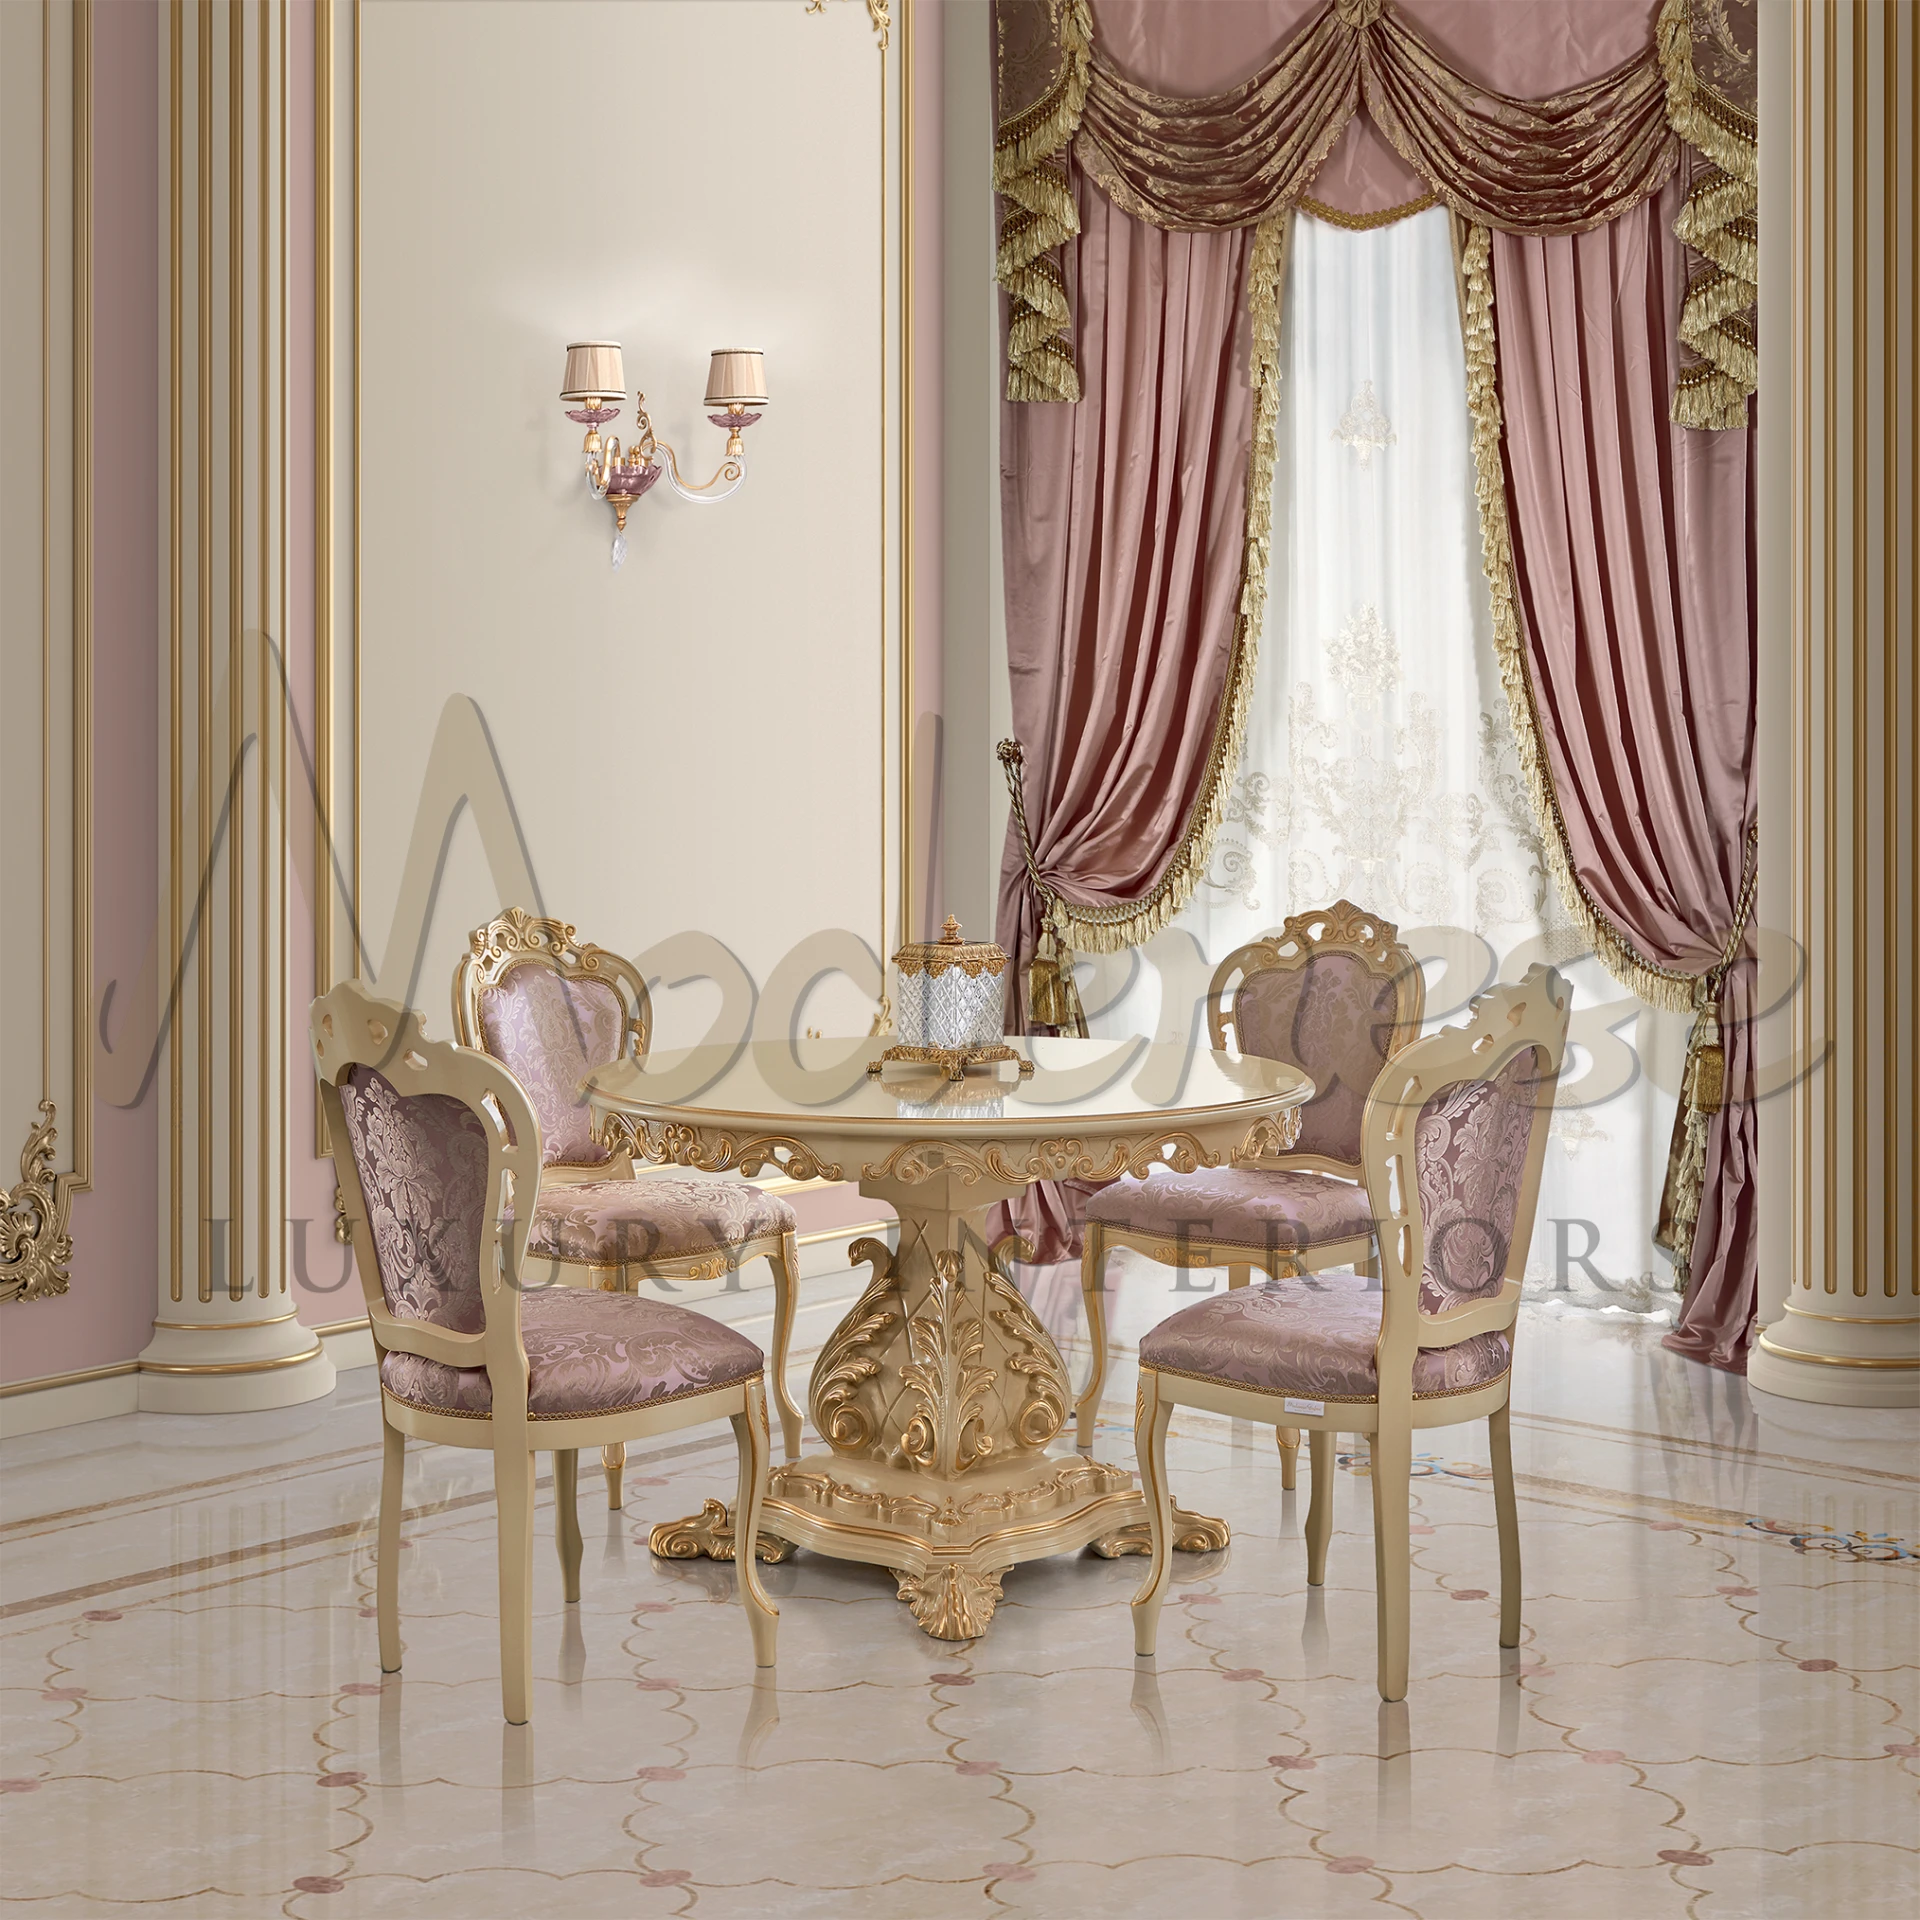 A luxurious room with golden accents, elegant furniture, and opulent curtains.